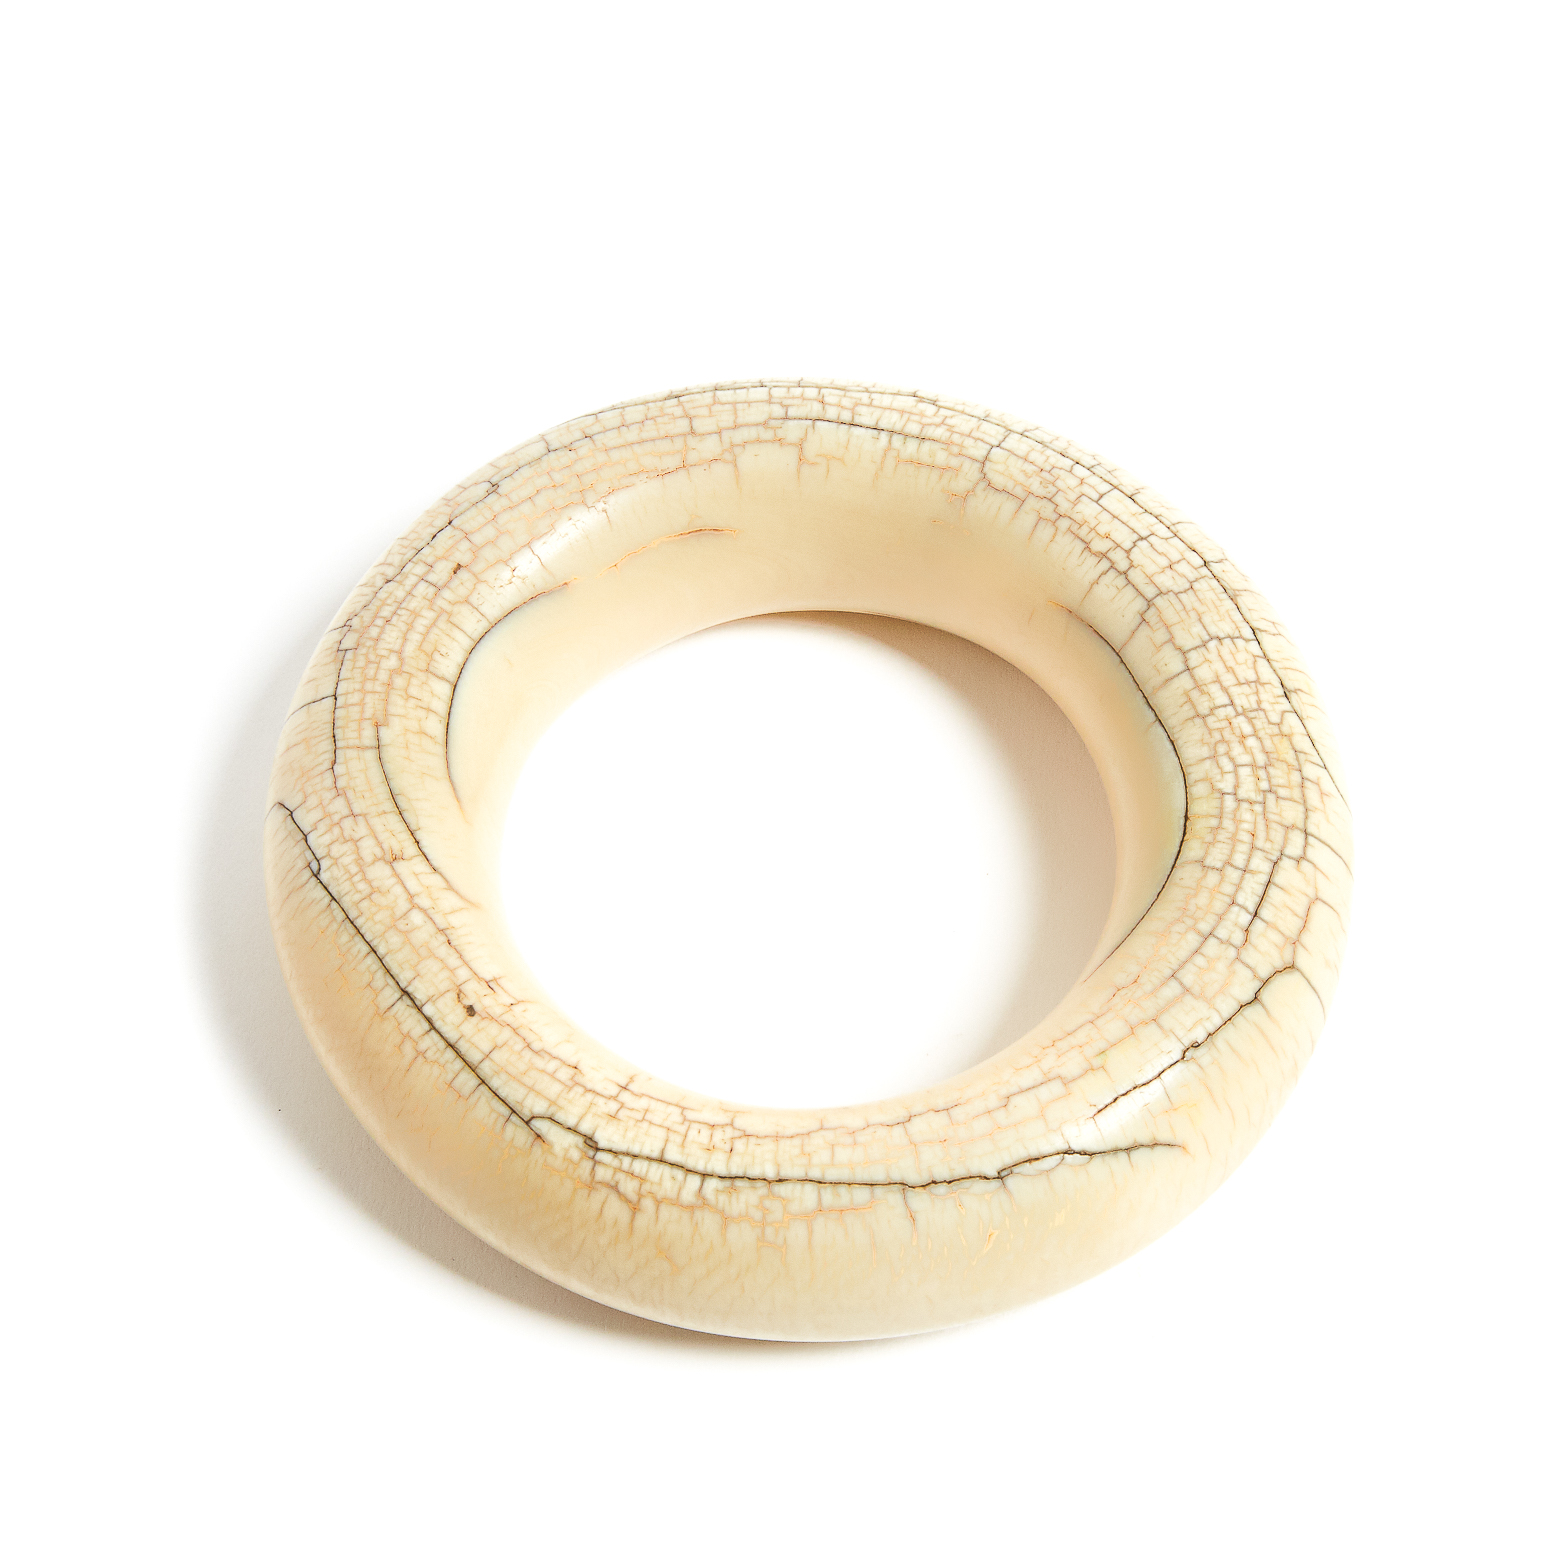 African Carved Ivory Bangle, early to mid 20th century